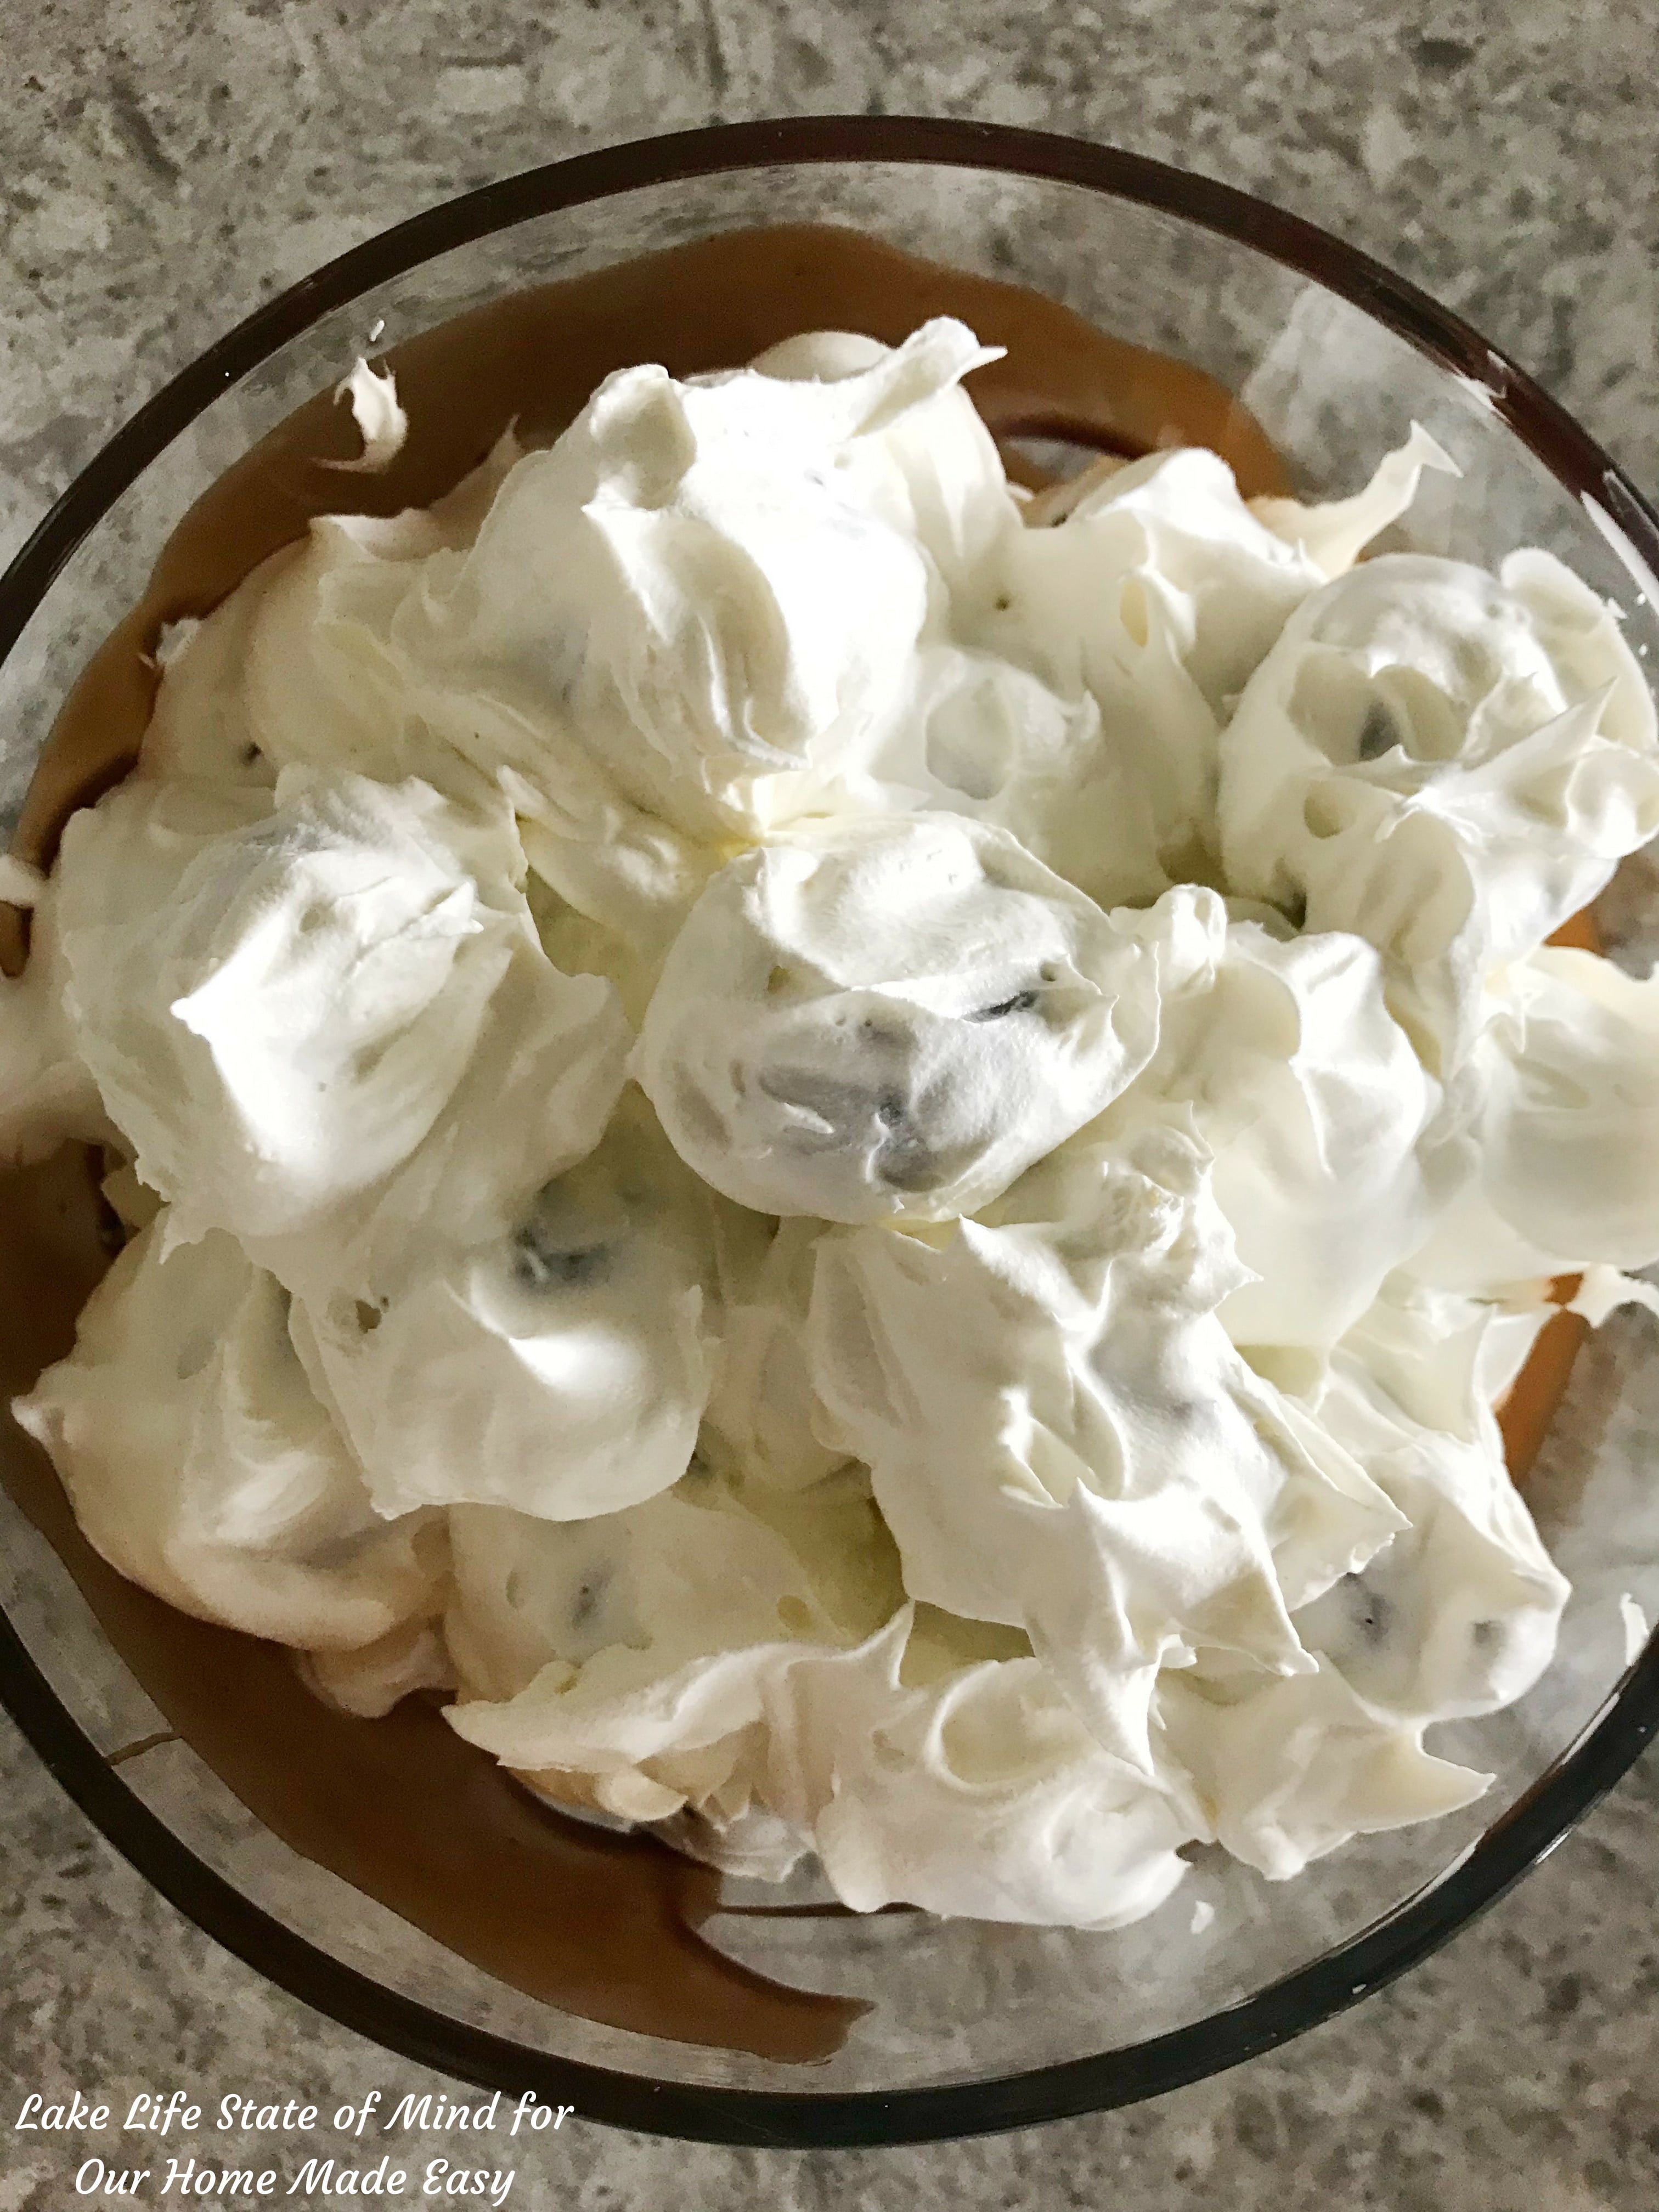 Cover the sweet cream puffs with whipped topping and layer into the chocolate syrup bowl